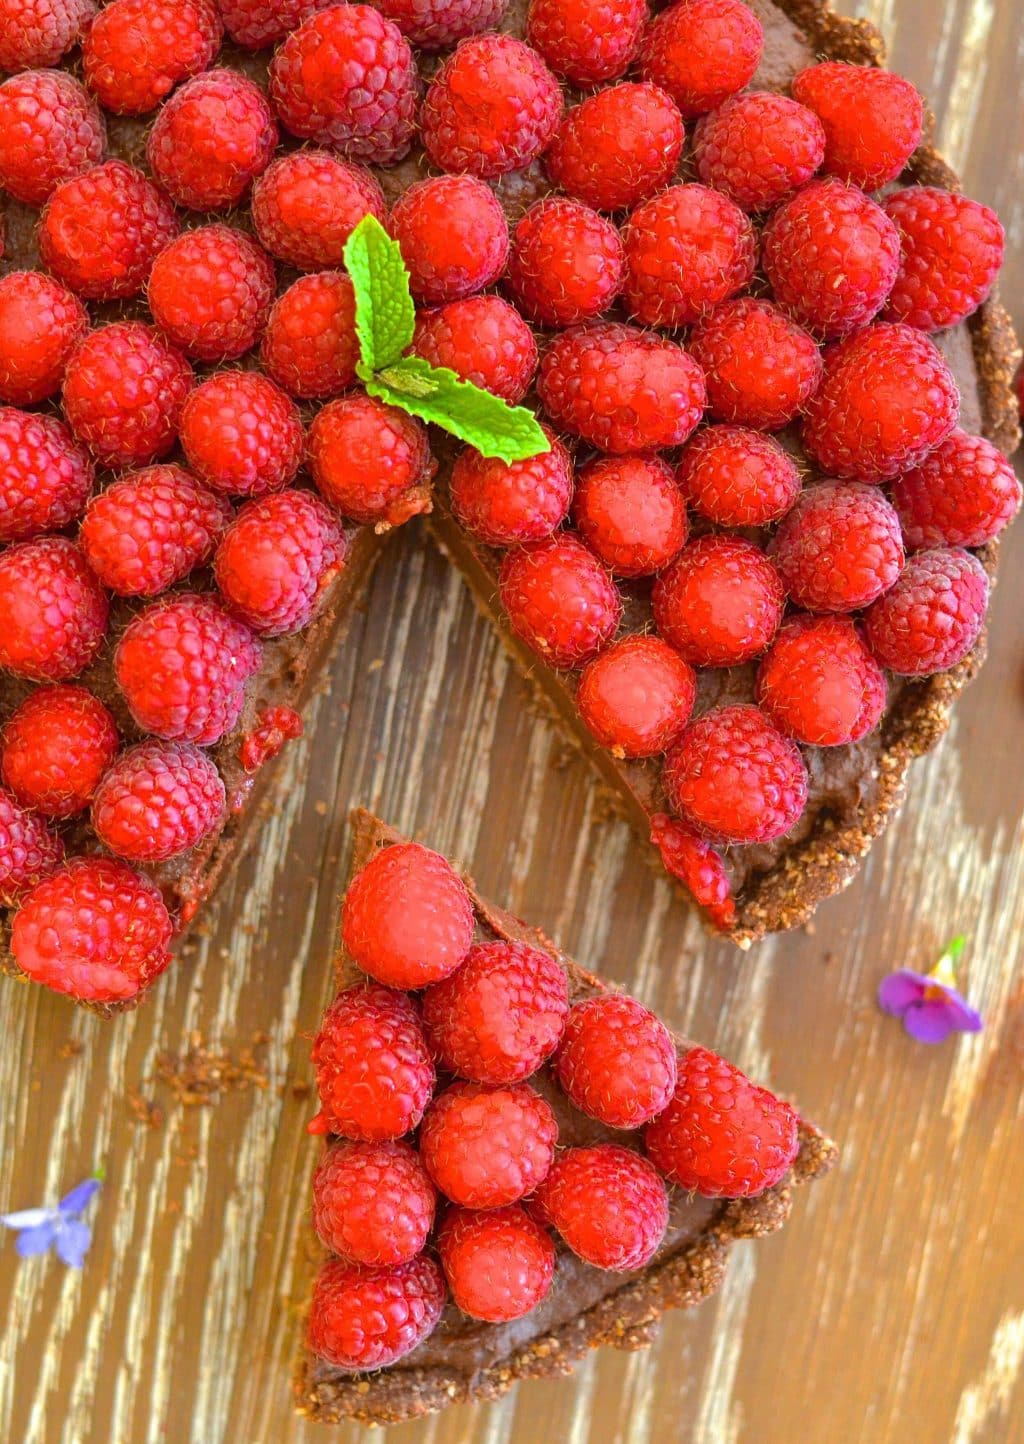 Want a dessert that looks and tastes decadent but is secretly quite good for you? I've got you covered with my Healthy Raspberry Chocolate Fudge Tart!